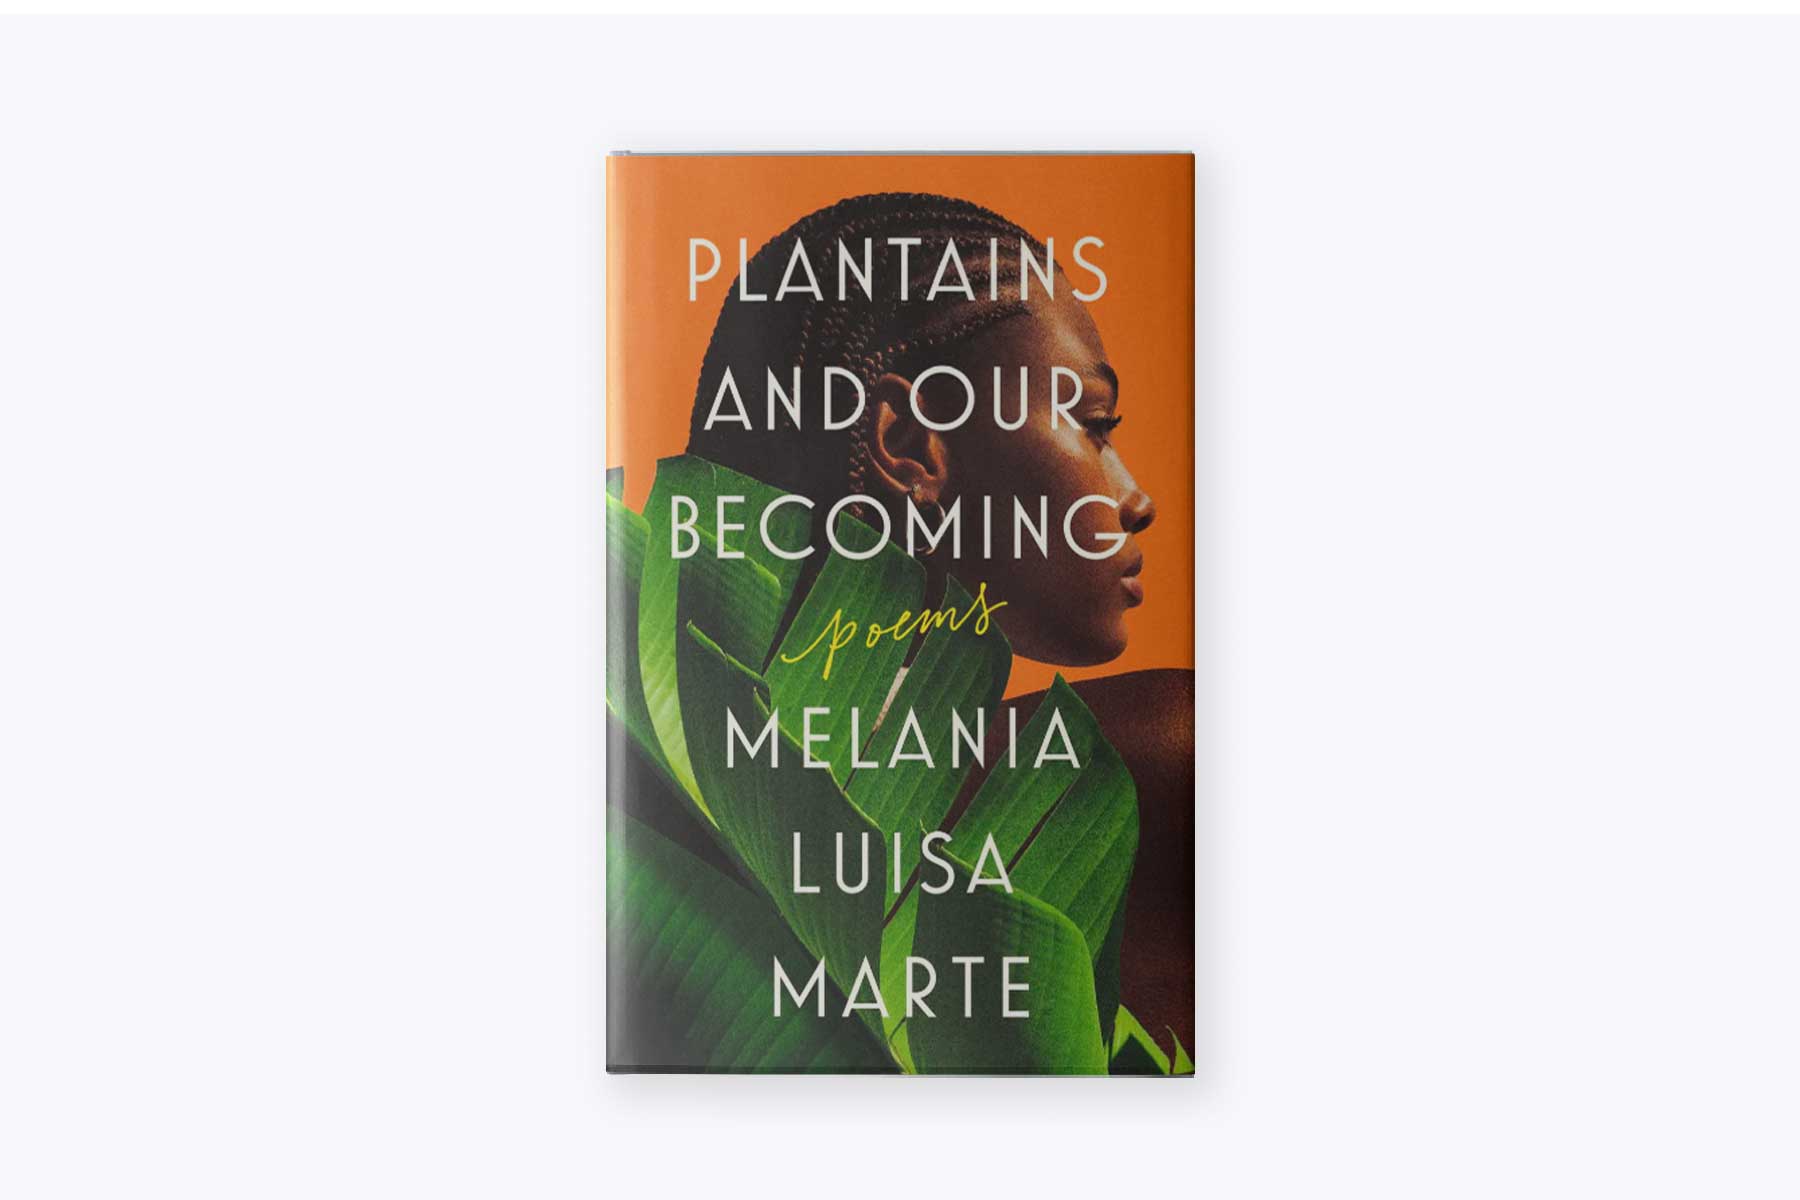 The cover of Melania Luisa Marte's book, Plantains and Our Becoming.